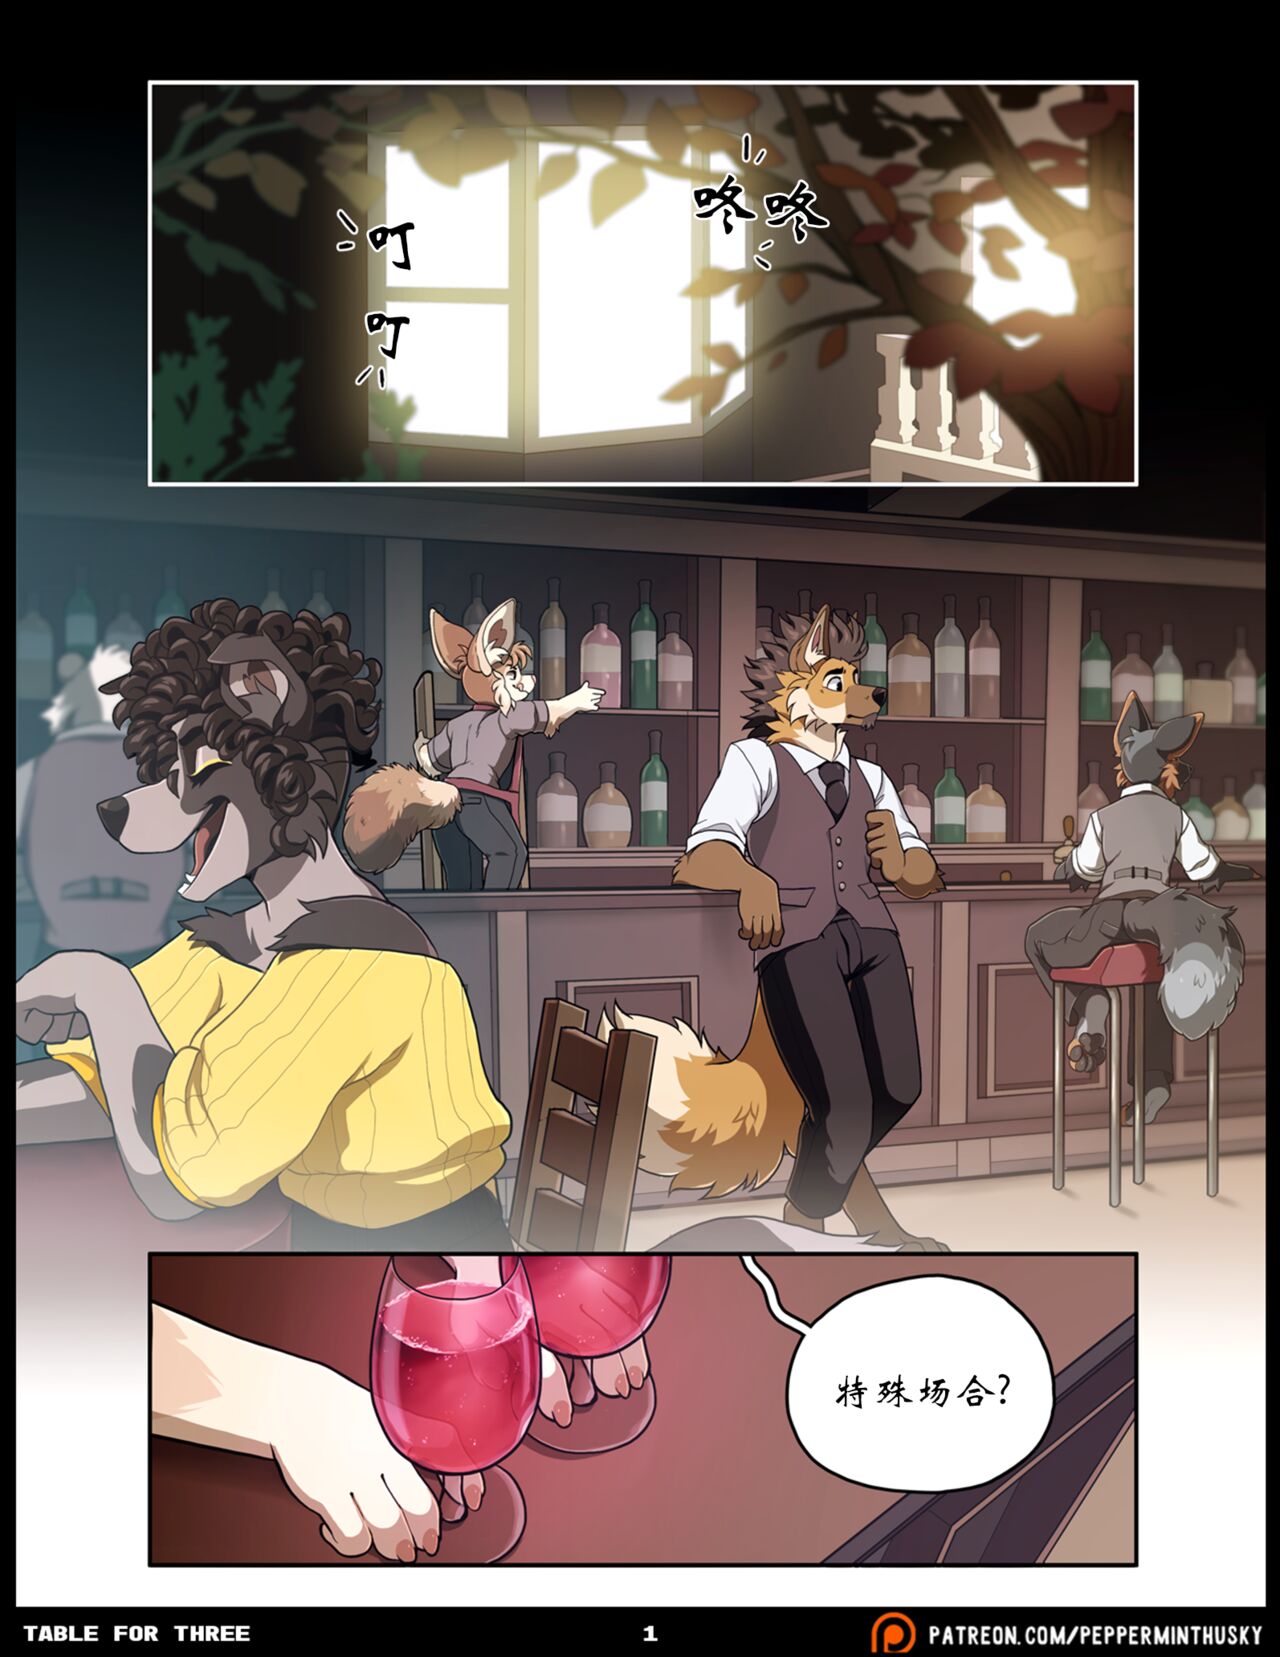 [PeppermintHusky] Table for Three: Remix (Ongoing) ｜三人一桌：重置 [Chinese] 【DrrT汉化】 